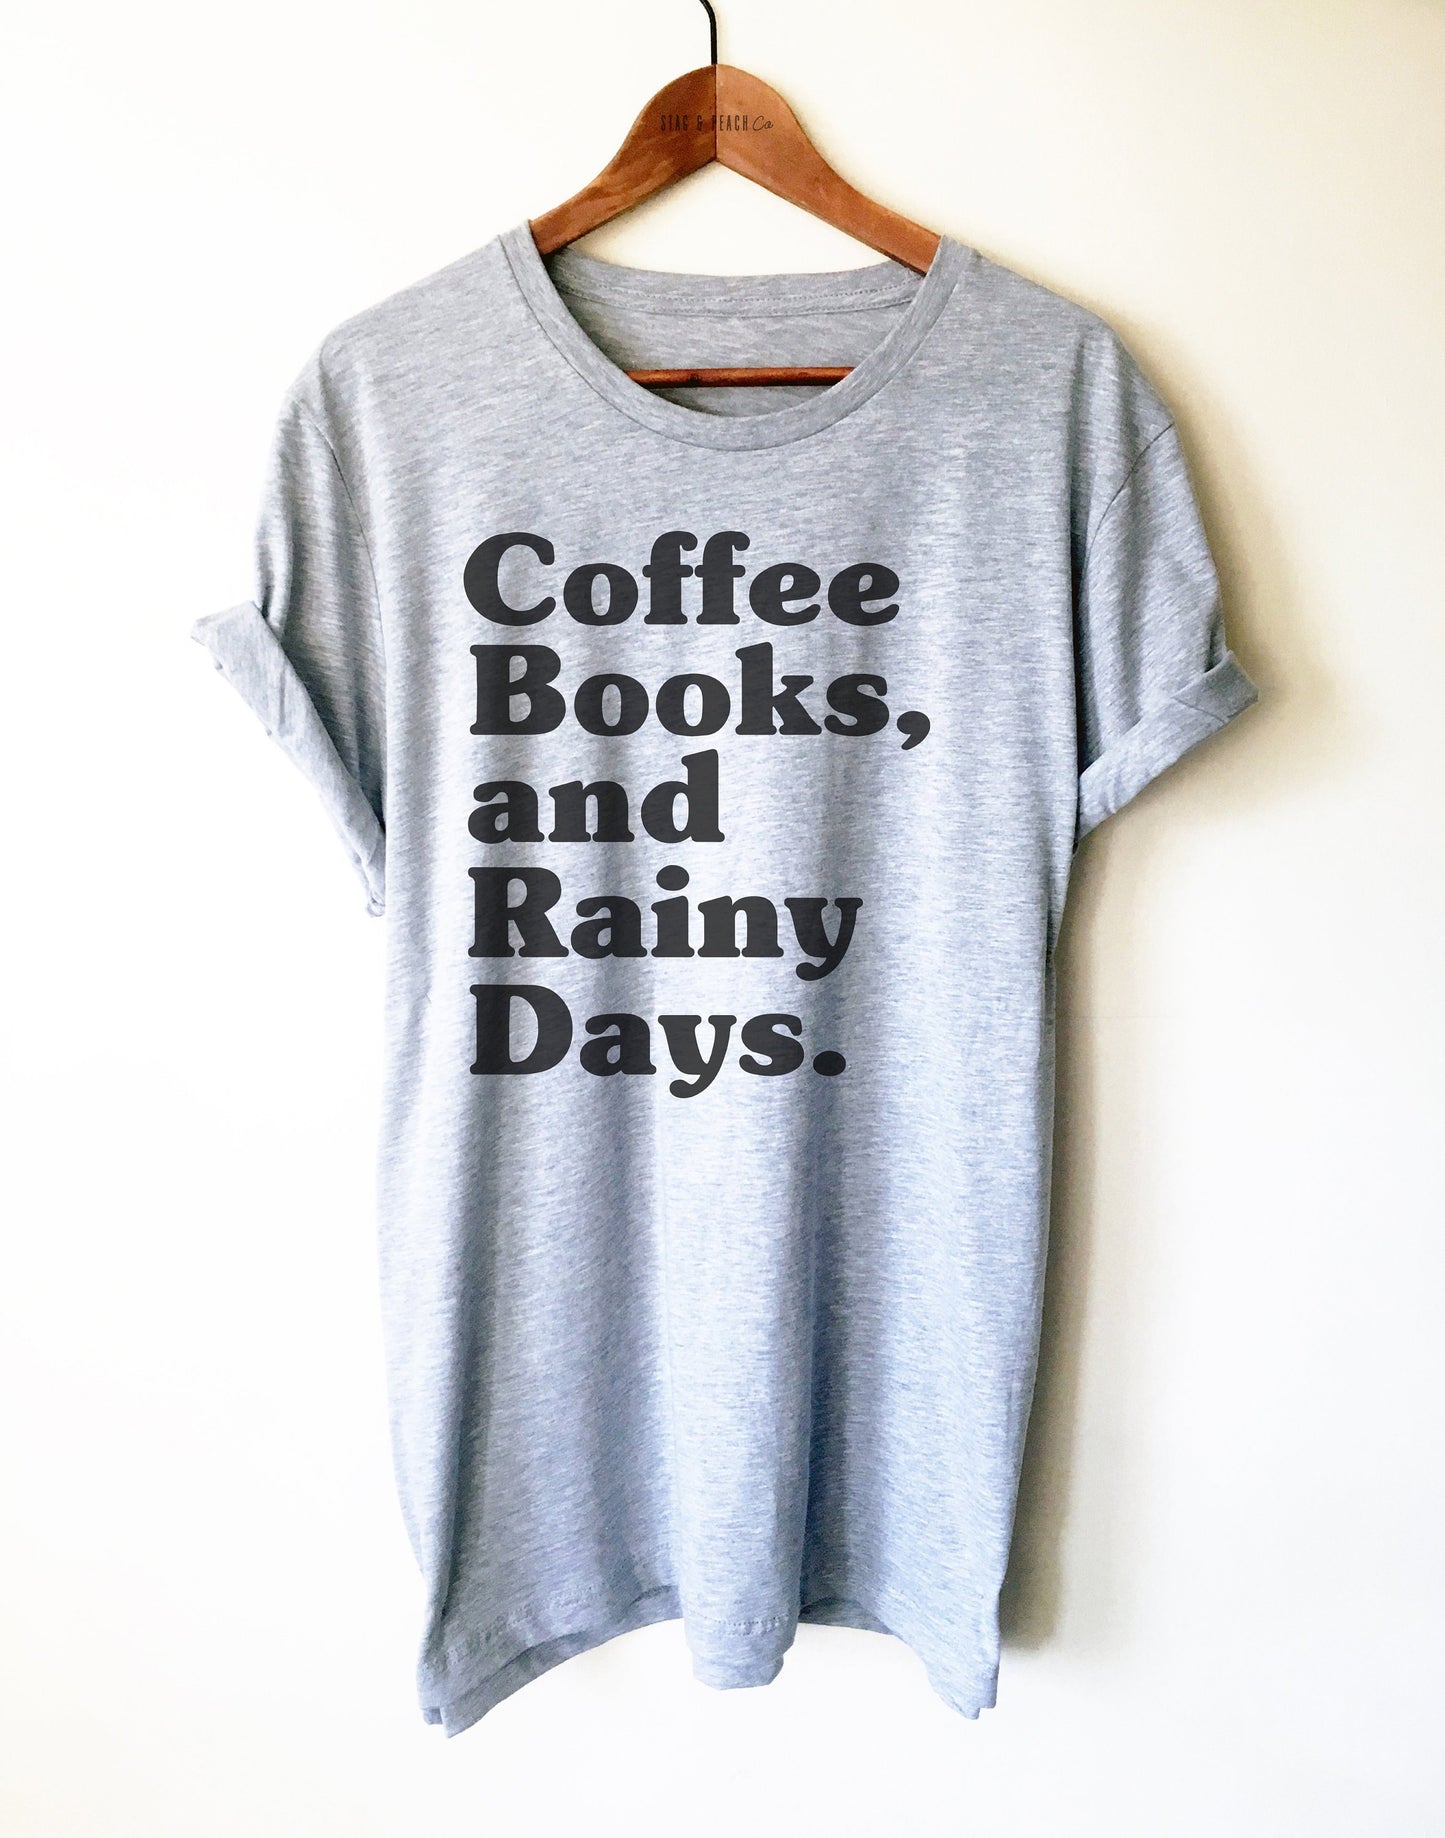 Coffee Books And Rainy Days Unisex Shirt - Coffee Lovers Gift, Reading Shirt, Book Blogging Shirt, Poet Gift, College Student Gift, Cozy Tee